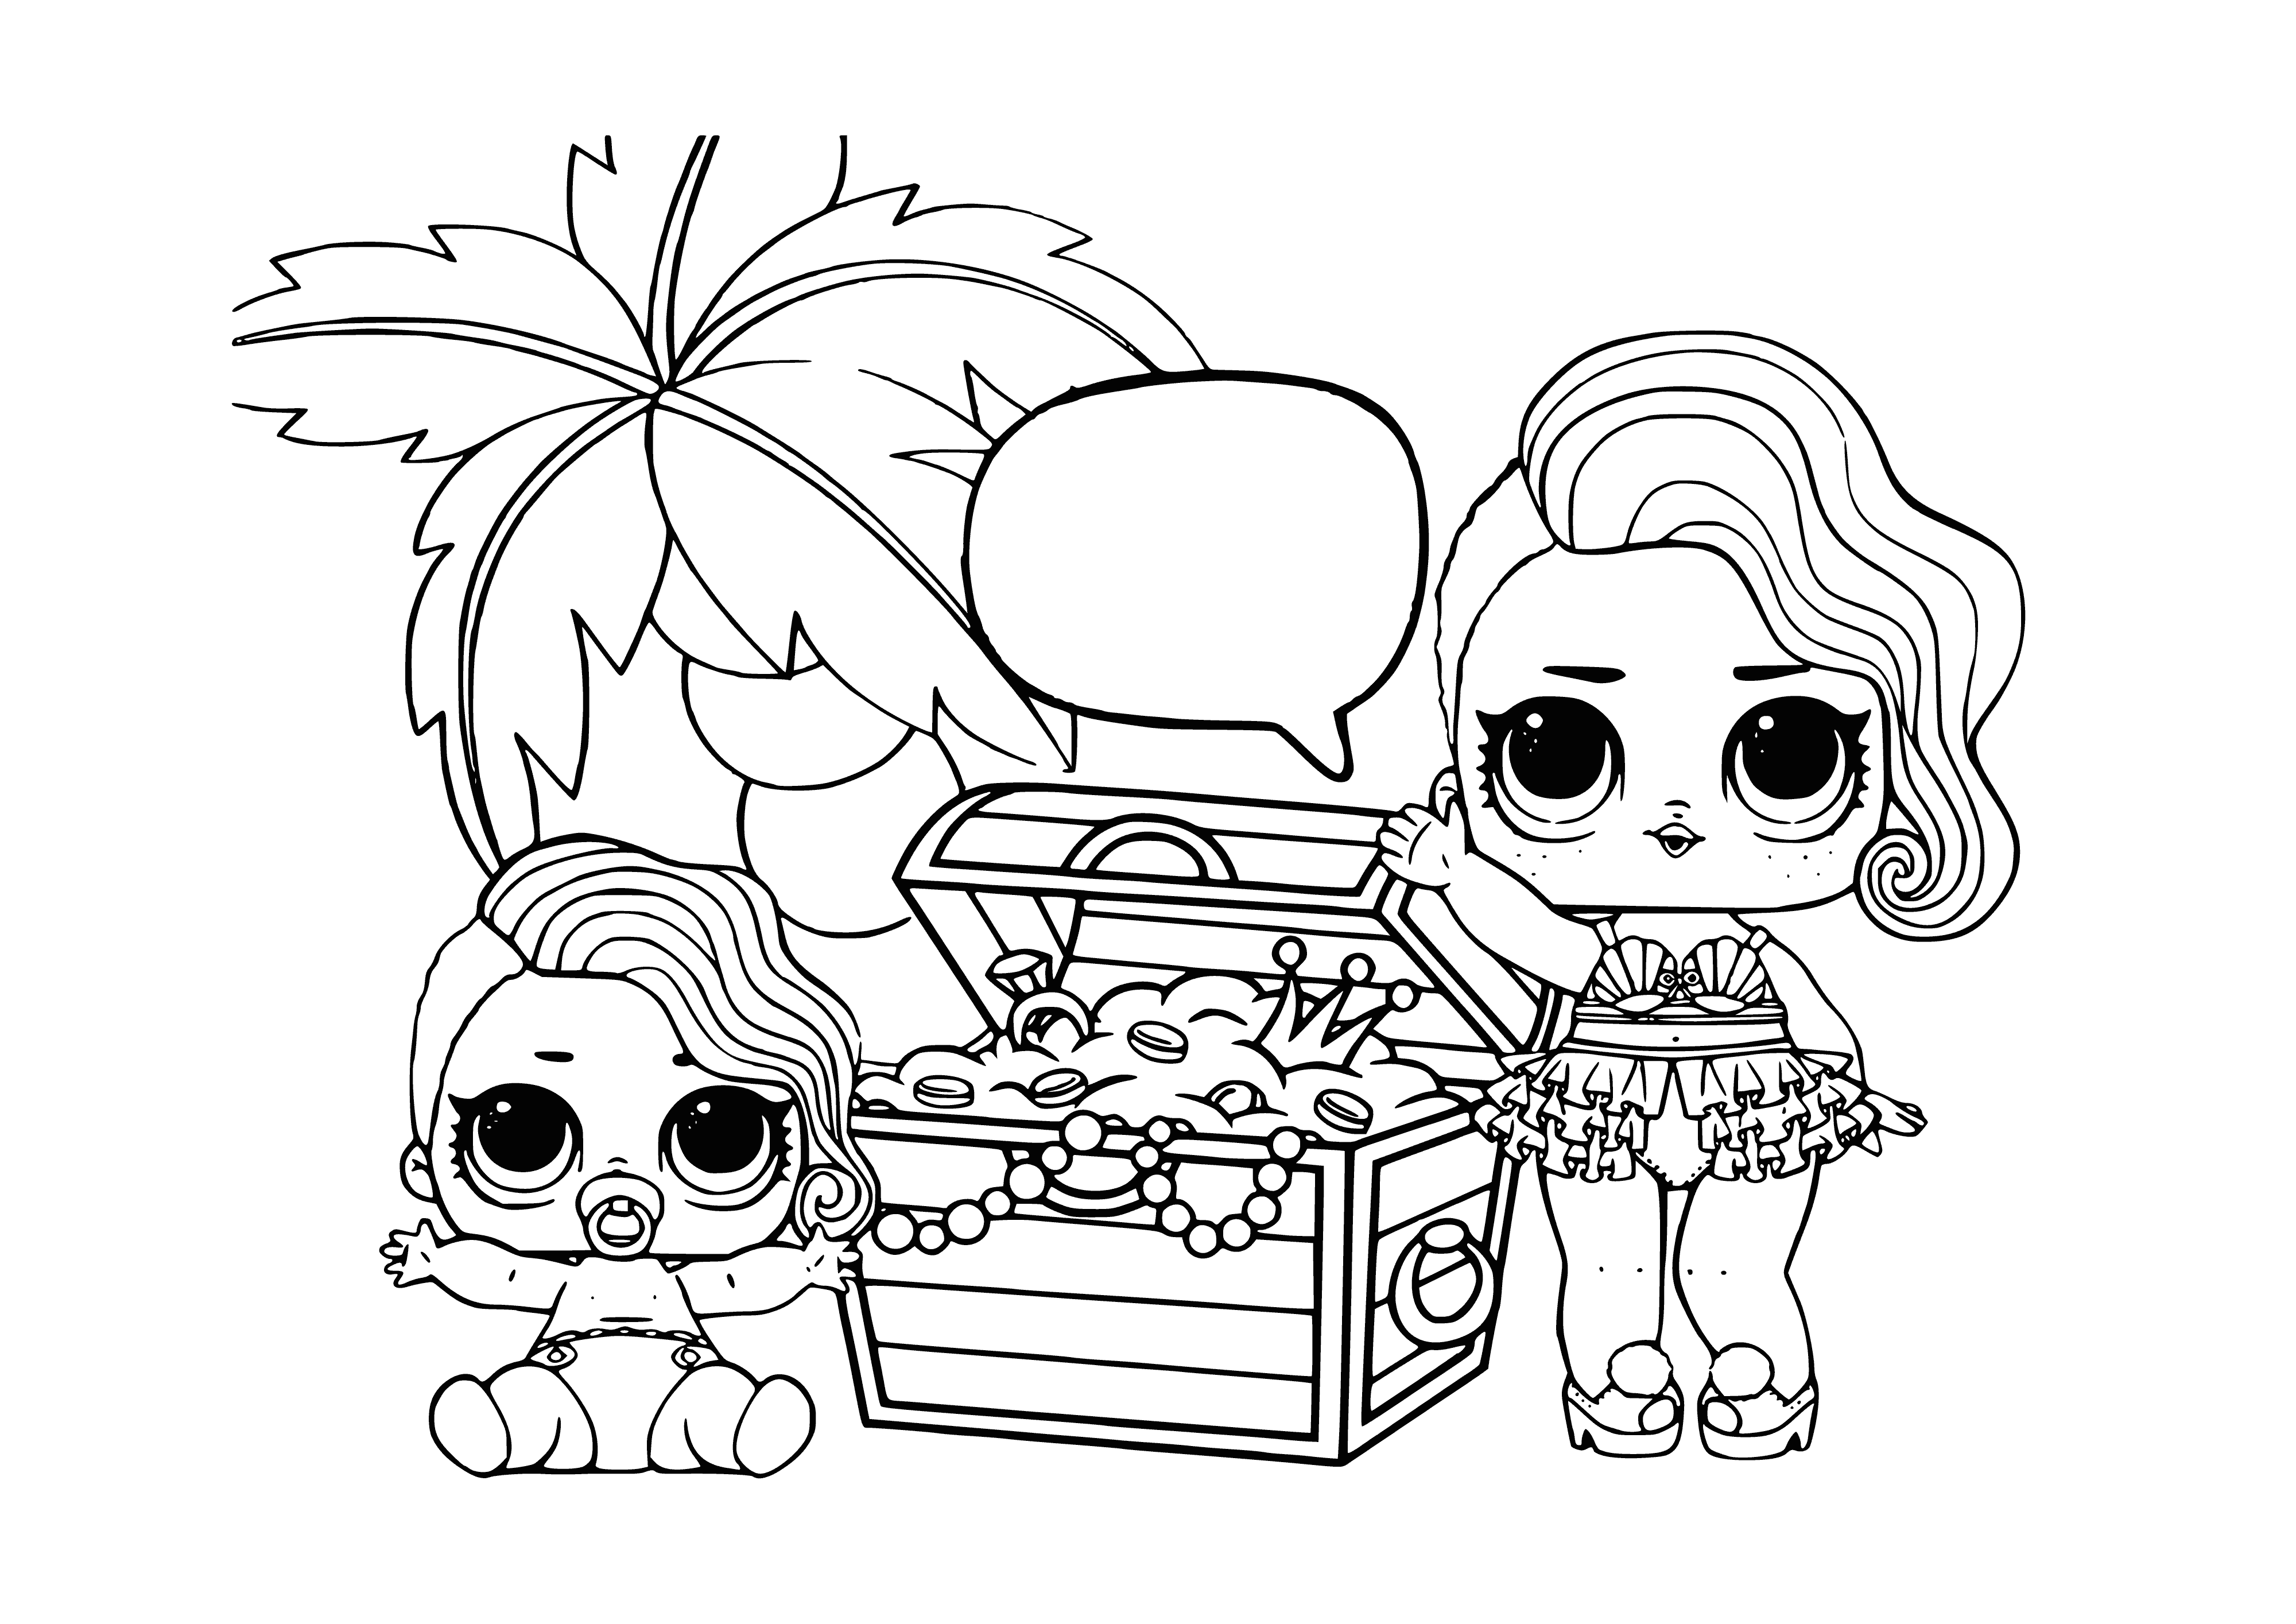 LOL treasures of the mermaids coloring page